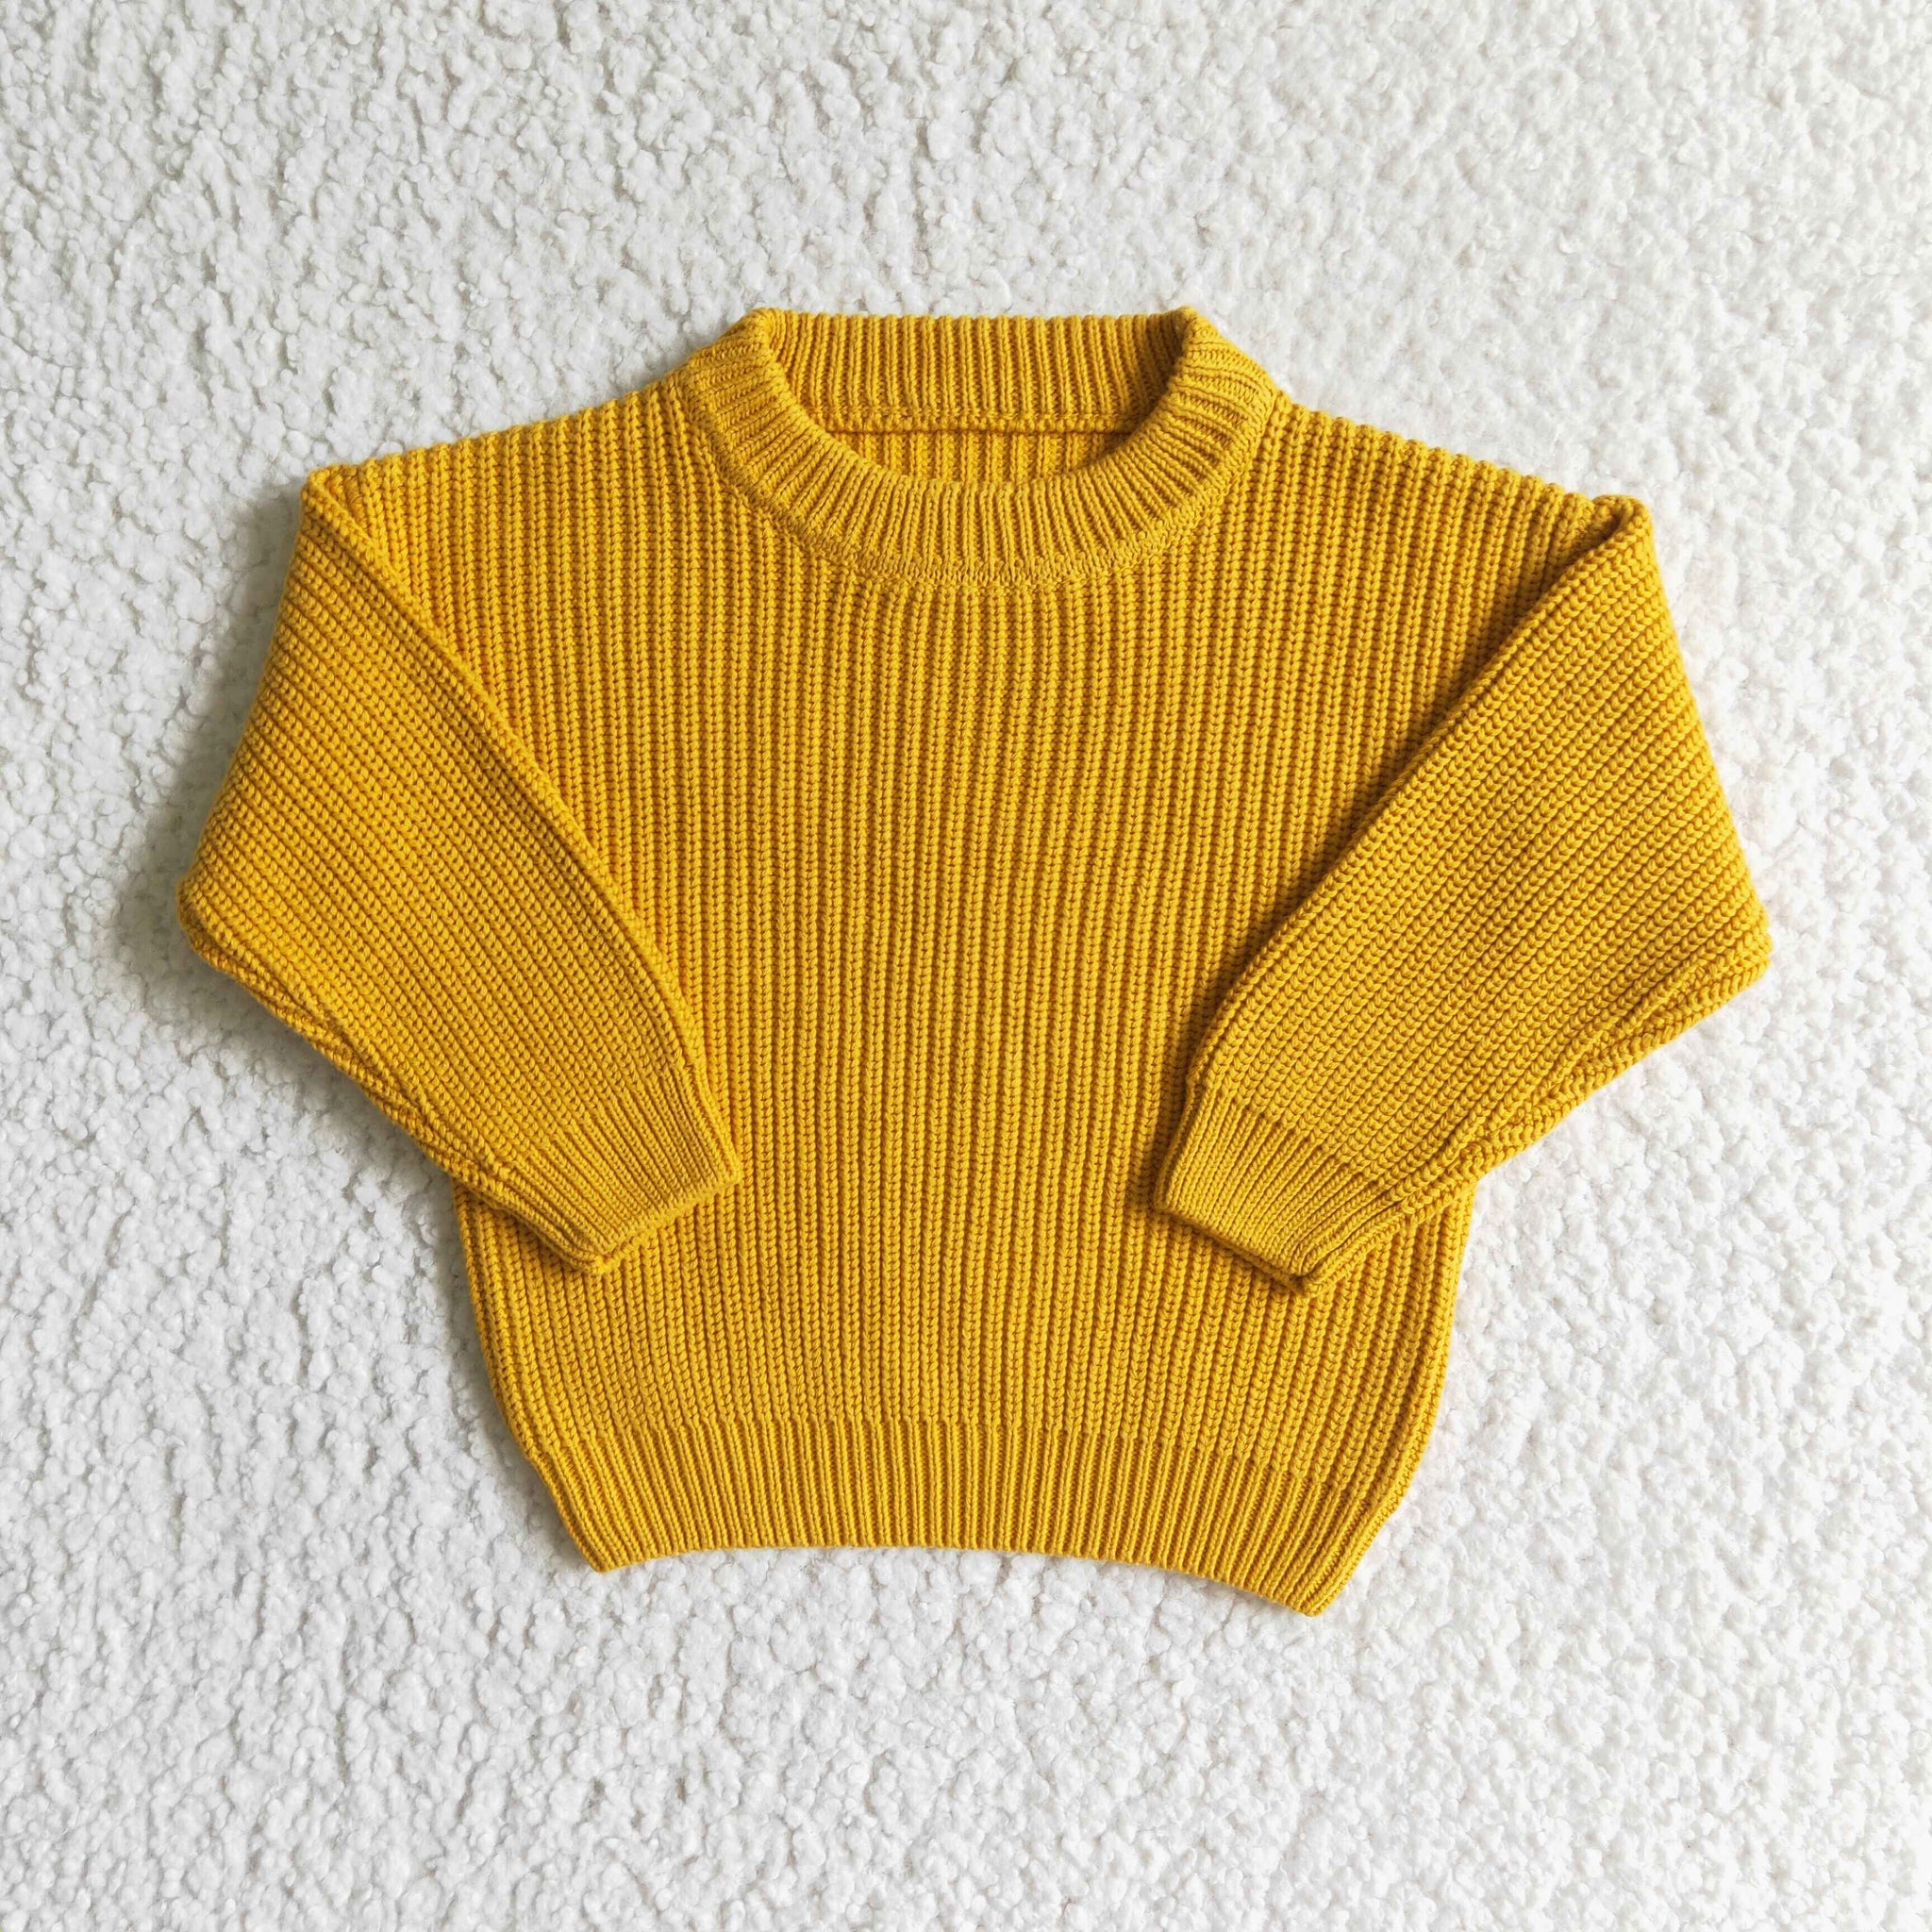 GT0034 yellow knitted sweater winter clothes for girls